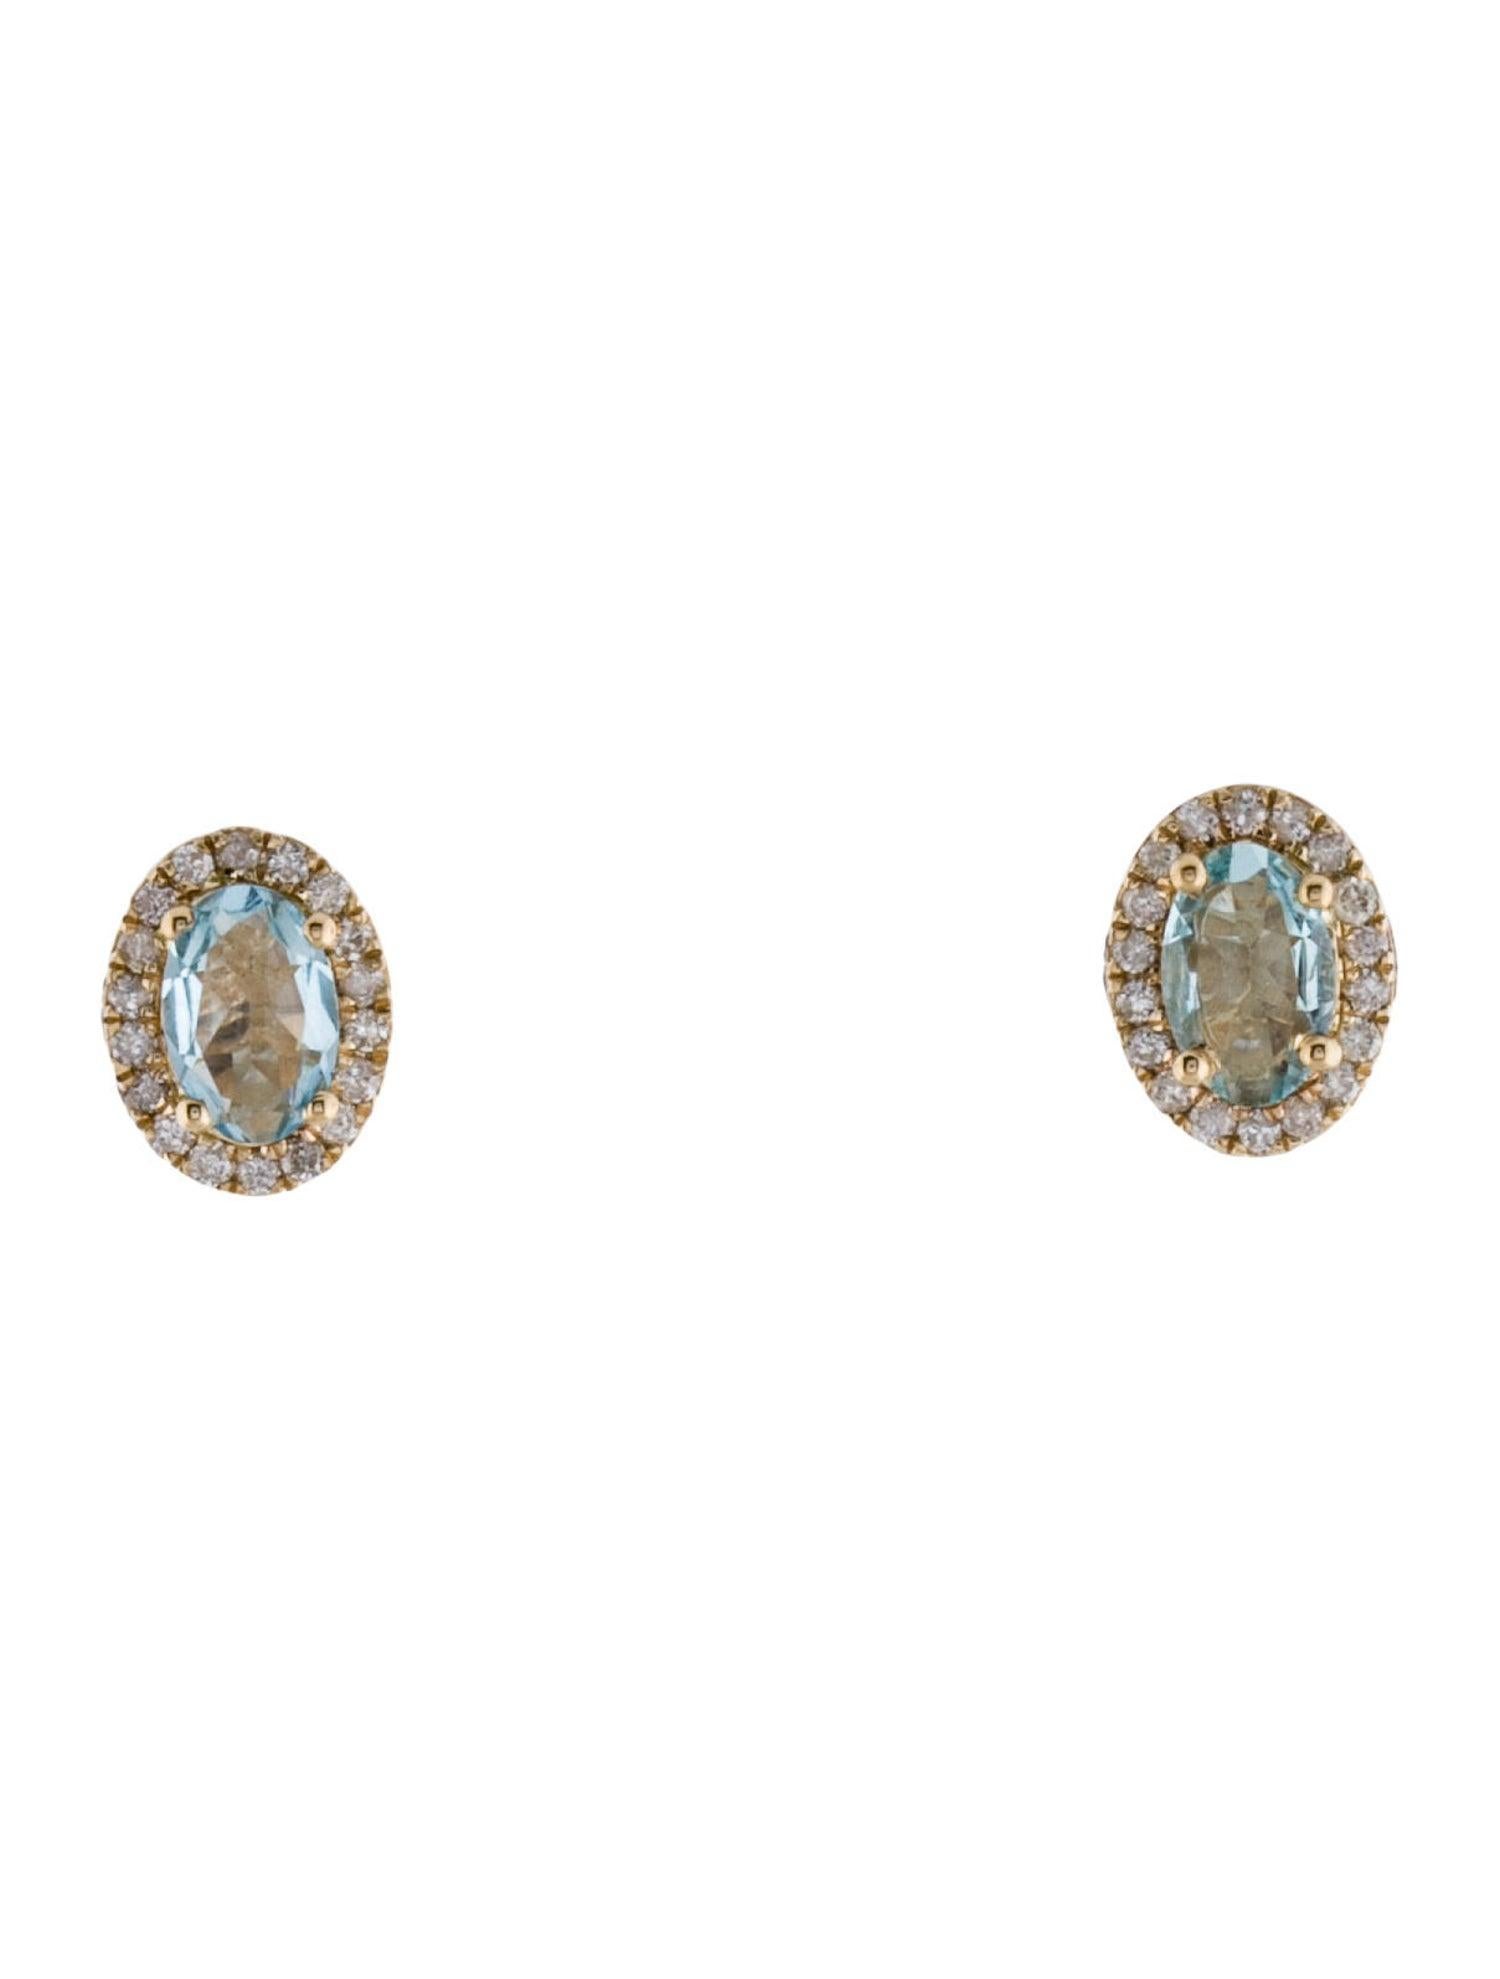 Dive into the tranquil depths of Seaside Serenity with these exquisite Aquamarine and Diamond earrings by Jeweltique. Crafted with precision in 14k yellow gold, these earrings capture the essence of the ocean's calming embrace, echoing the soothing